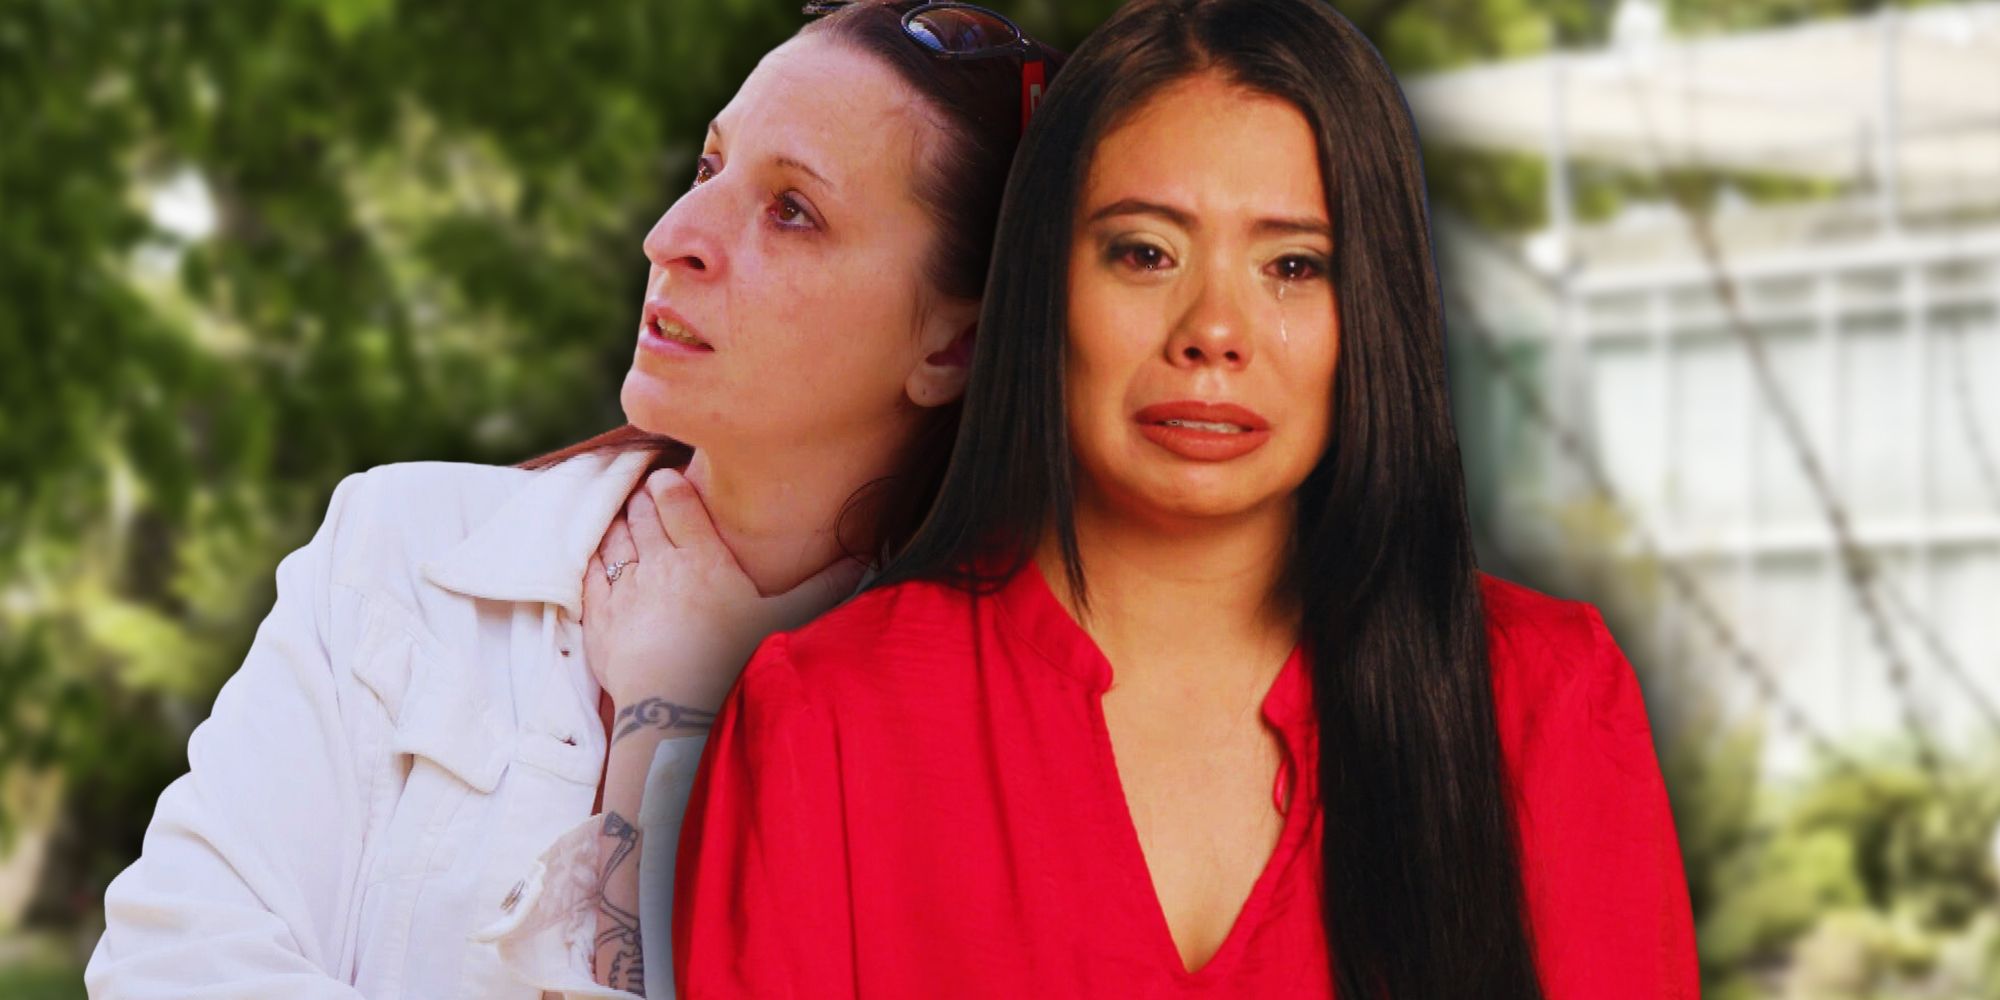 “Why Don’t They Date?”: Jeymi Noguera Meets Surprising 90 Day Fiancé Cast Member